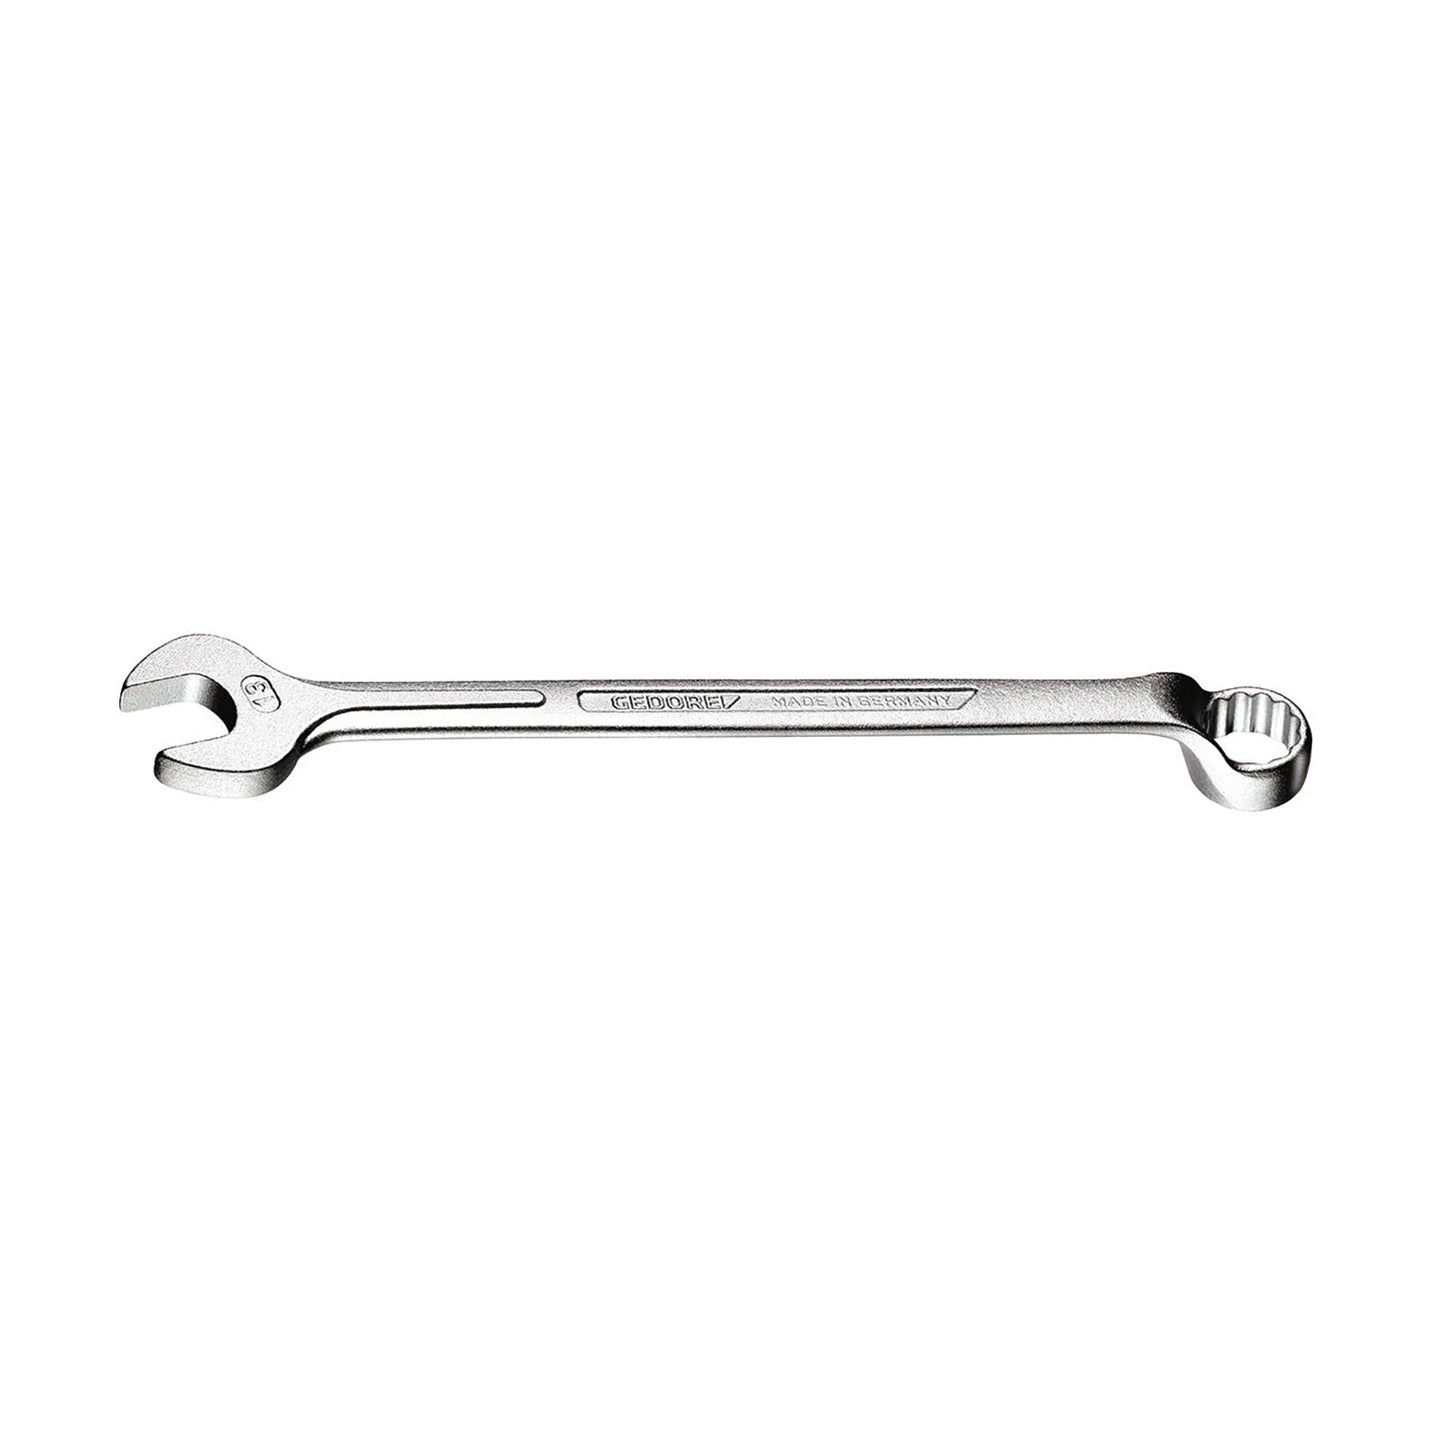 GEDORE 1 B 11/16W - Combination Wrench, 11/16W (6010470)